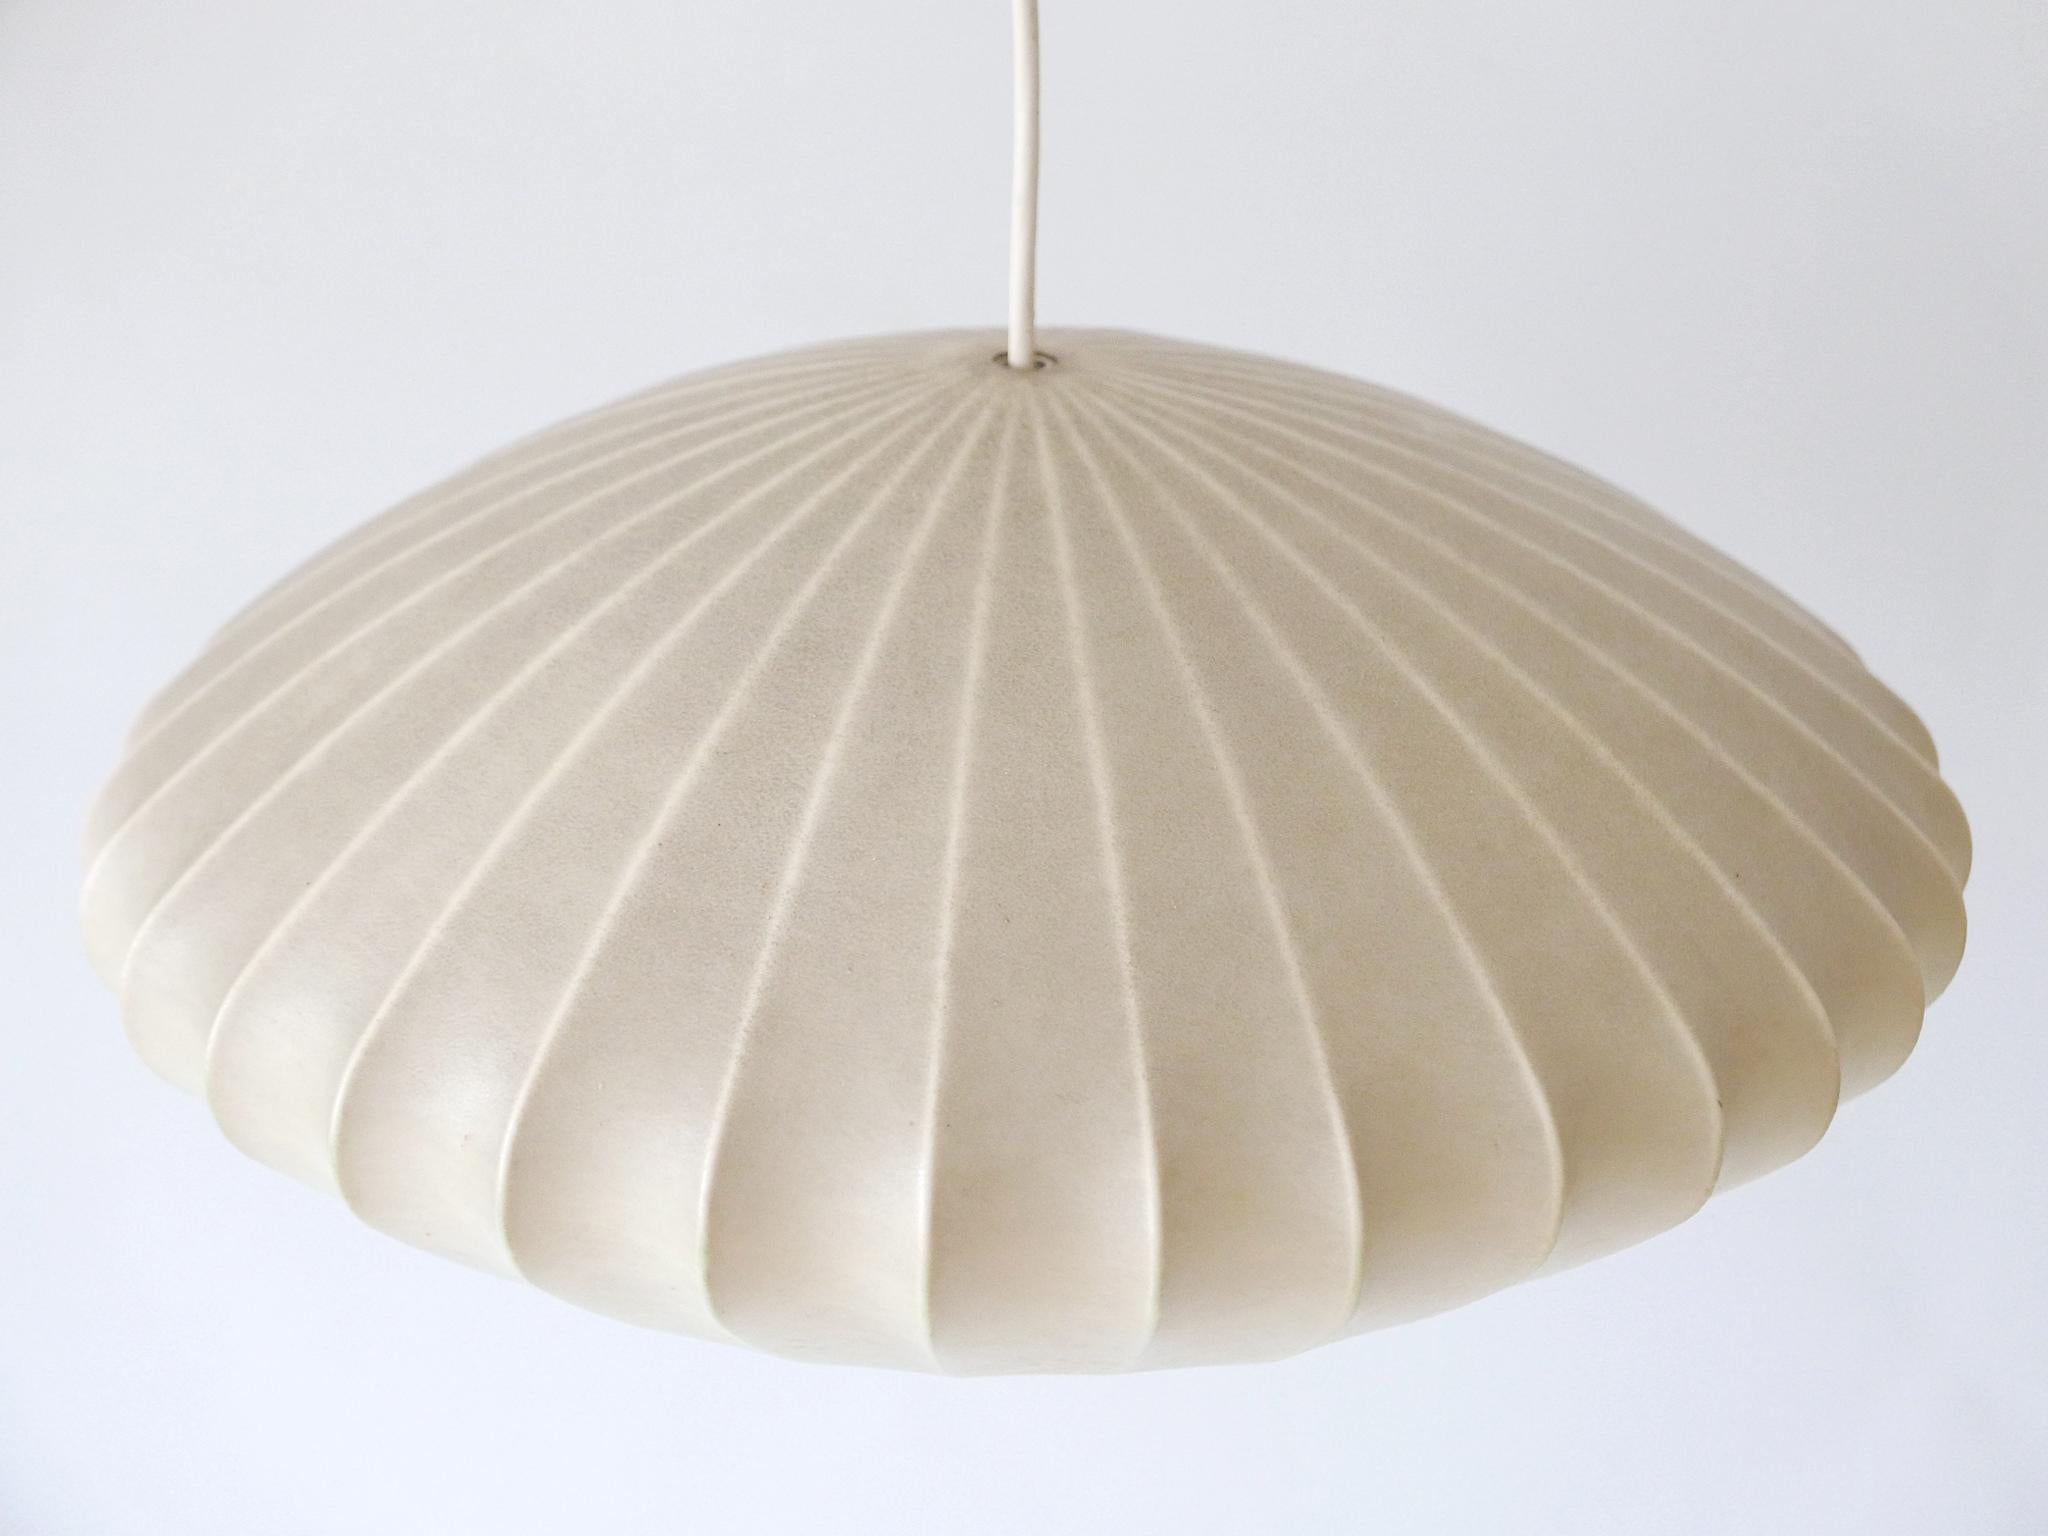 Rare Mid-Century Modern Cocoon Pendant Lamp or Hanging Light by Goldkant 1960s For Sale 9